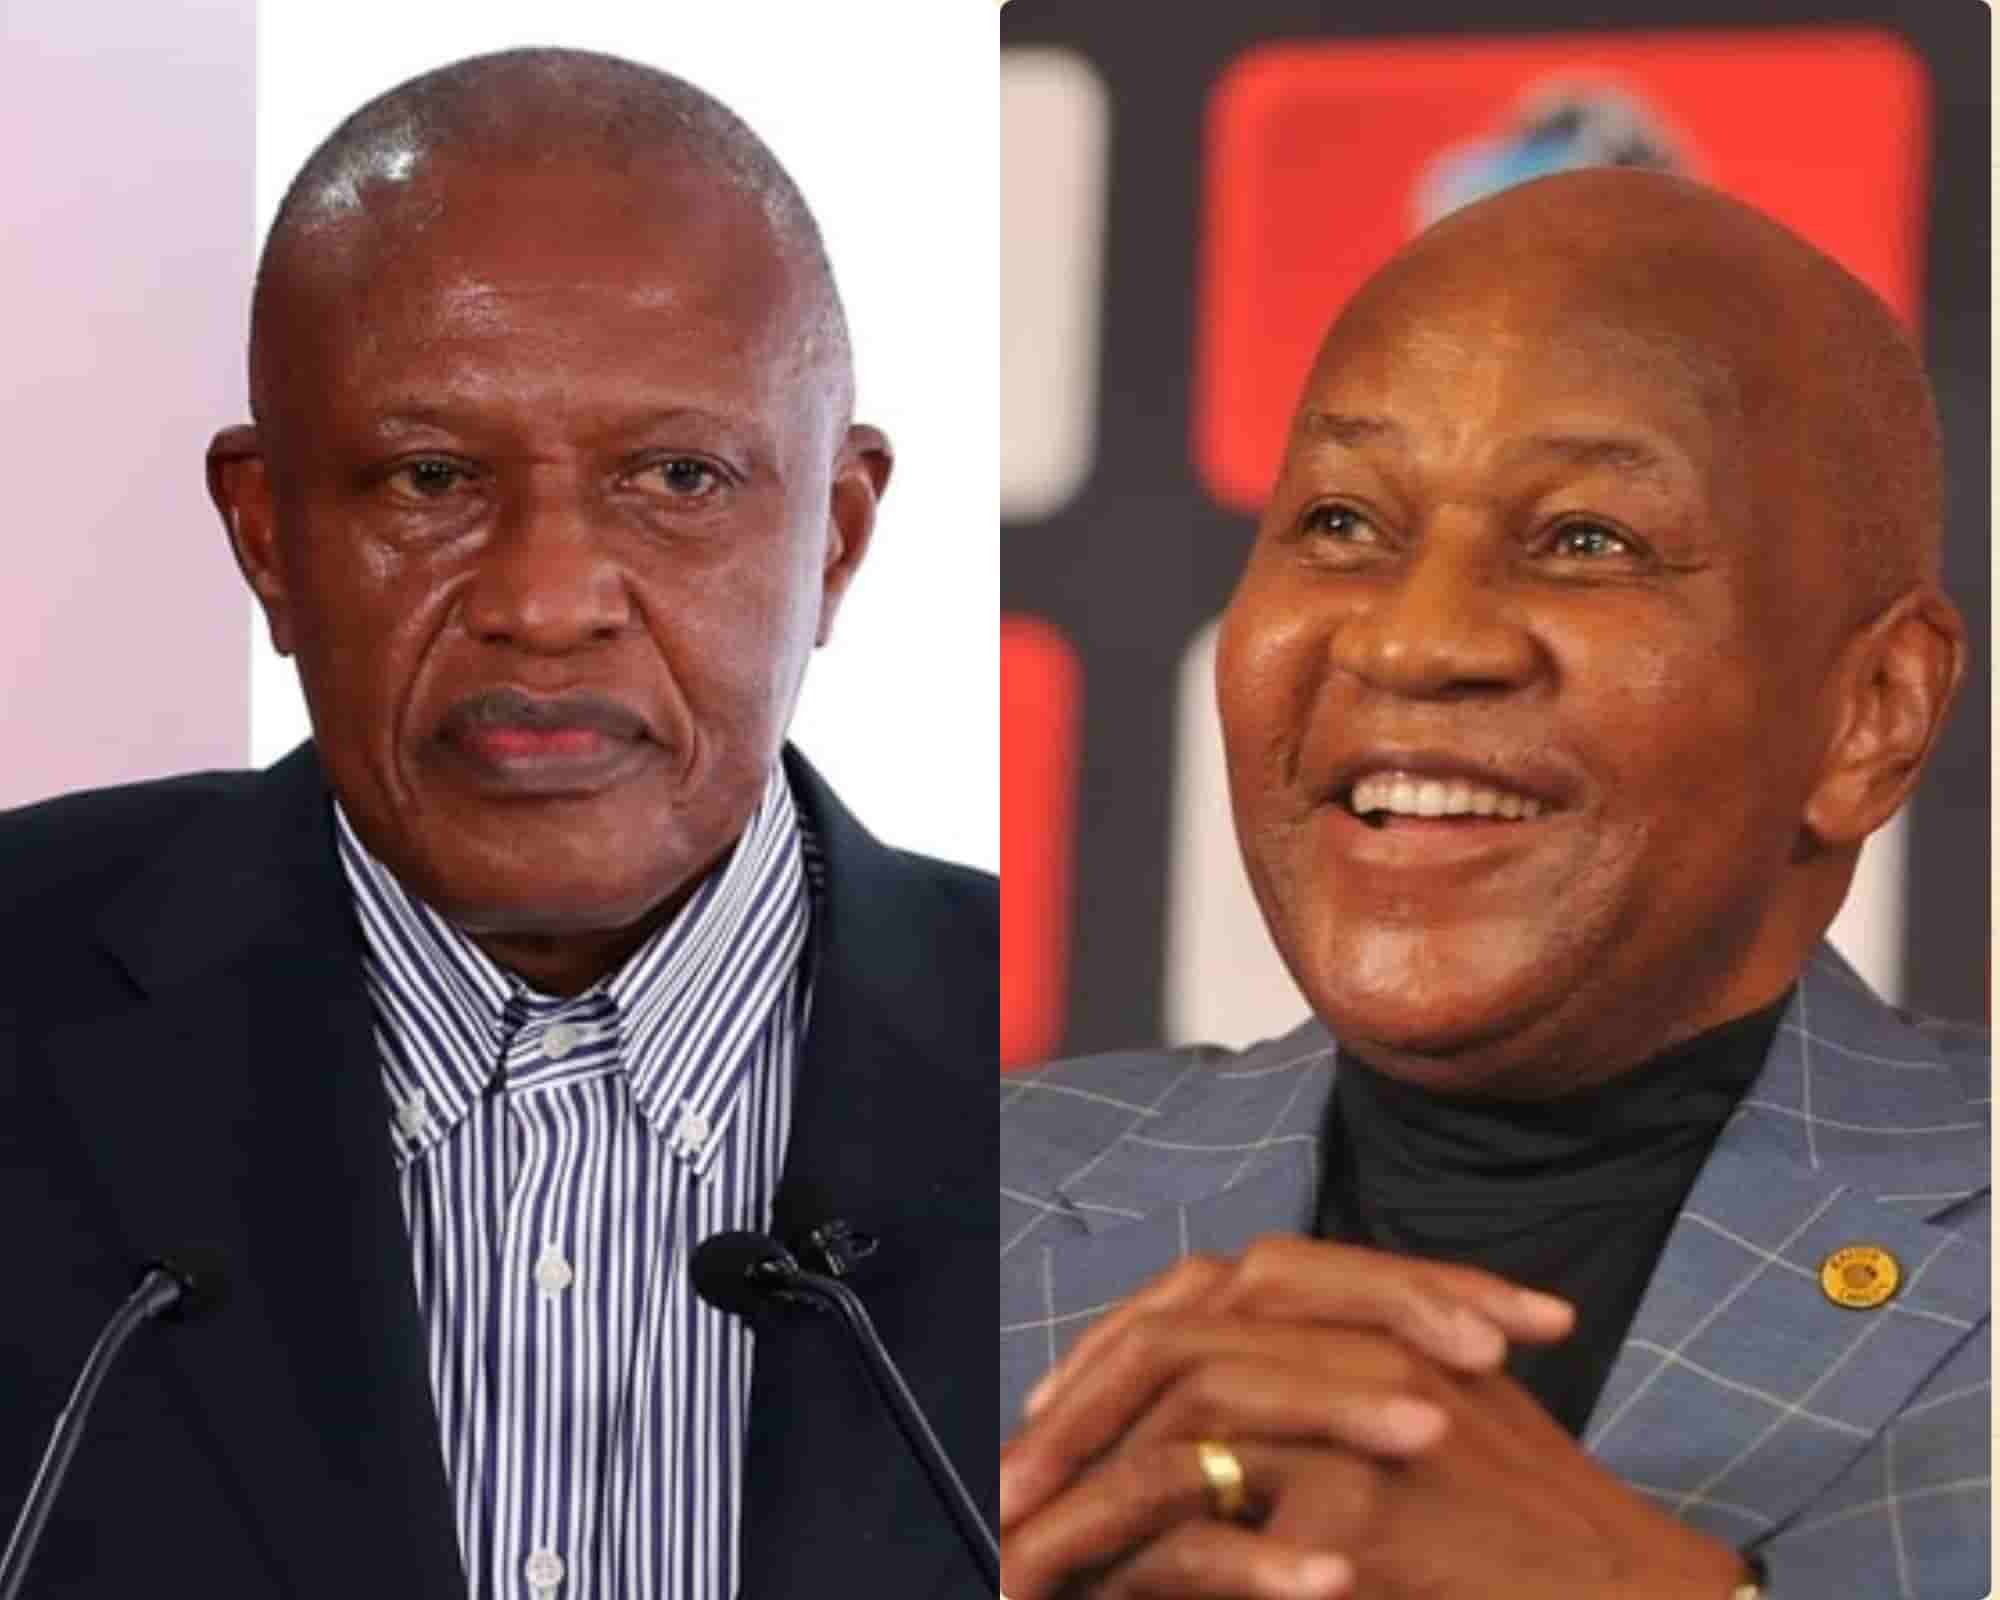 spotcovery-south-african-football-administrators-irvin-khoza-and-kaizer-motaung-two-of-the-richest-football-owners-in-south-africa